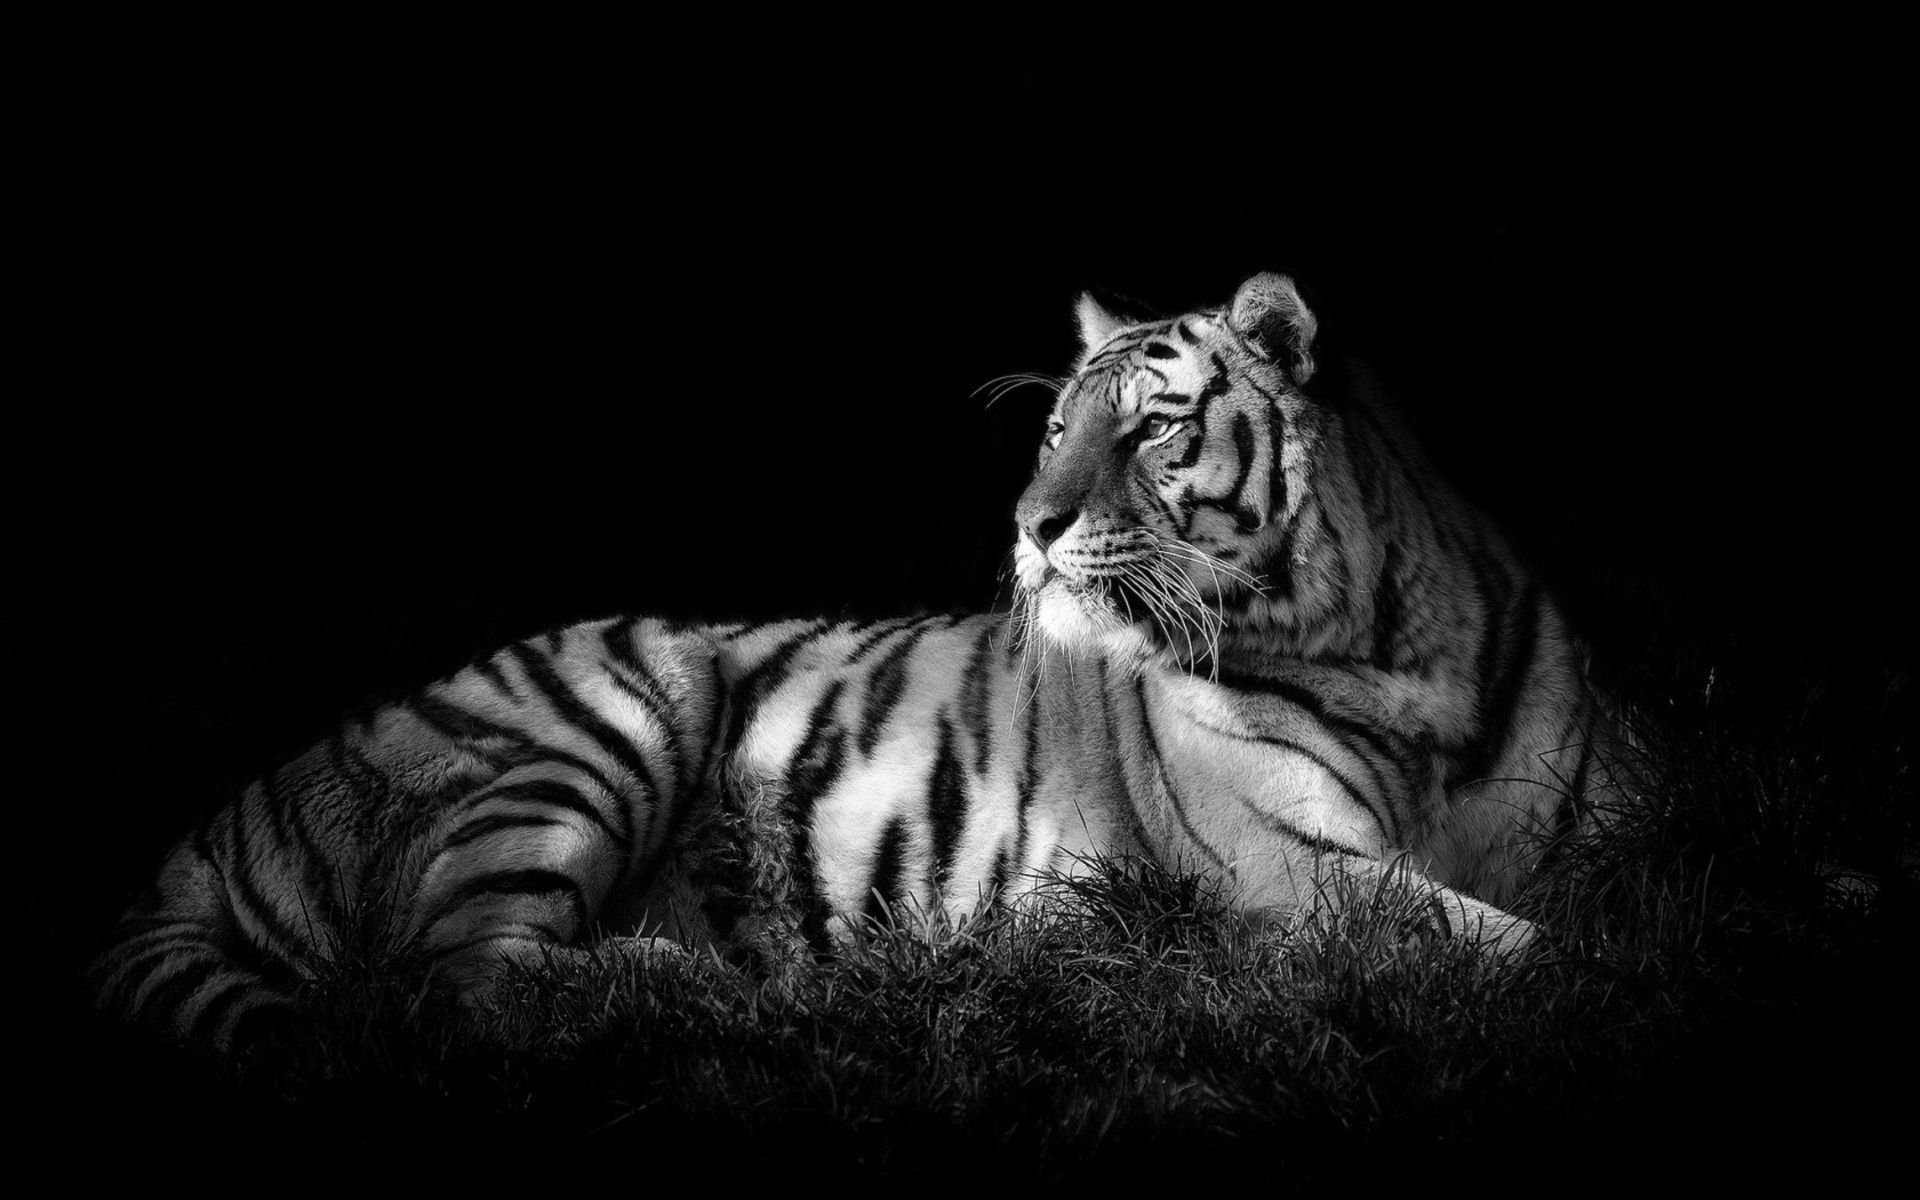 Black and White Tiger Images | Wallpaper